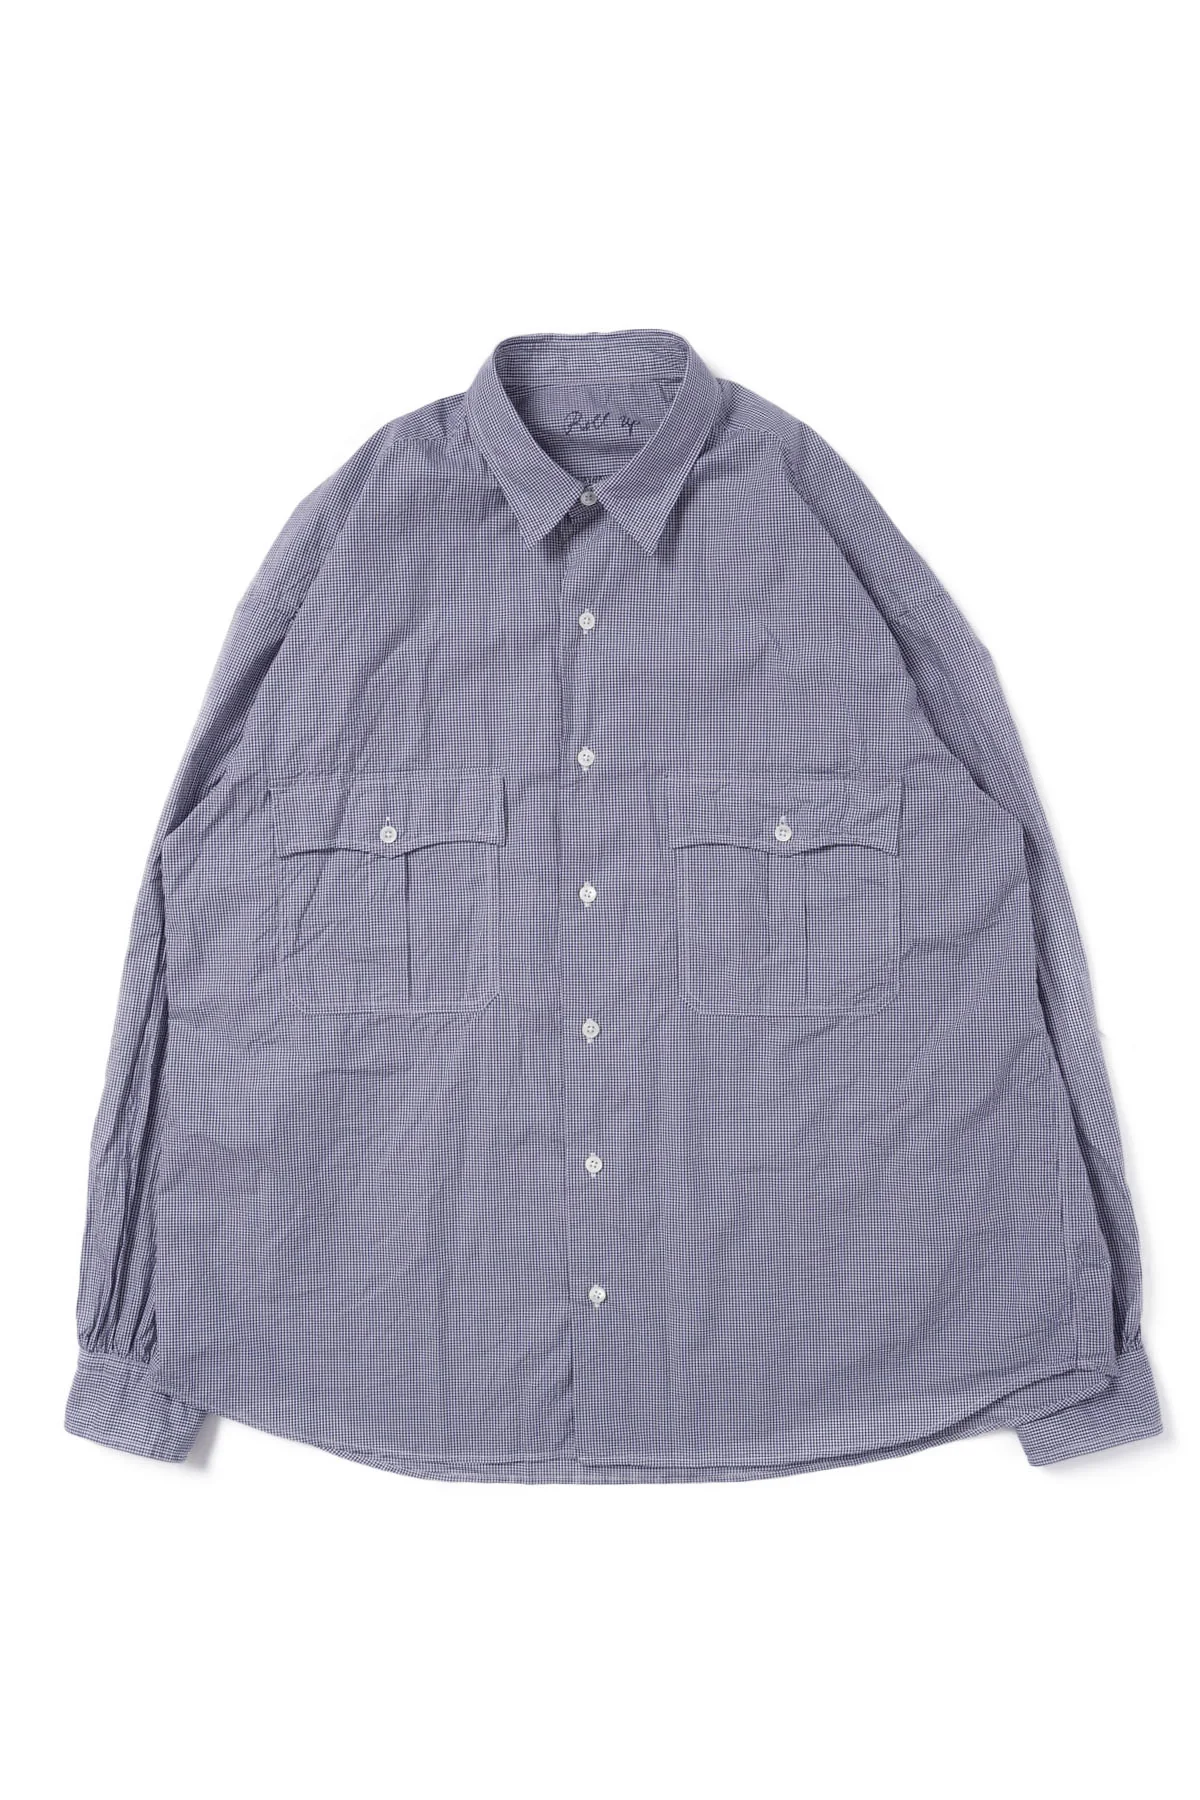 ROLL UP NEW GINGHAM CHECK SHIRT